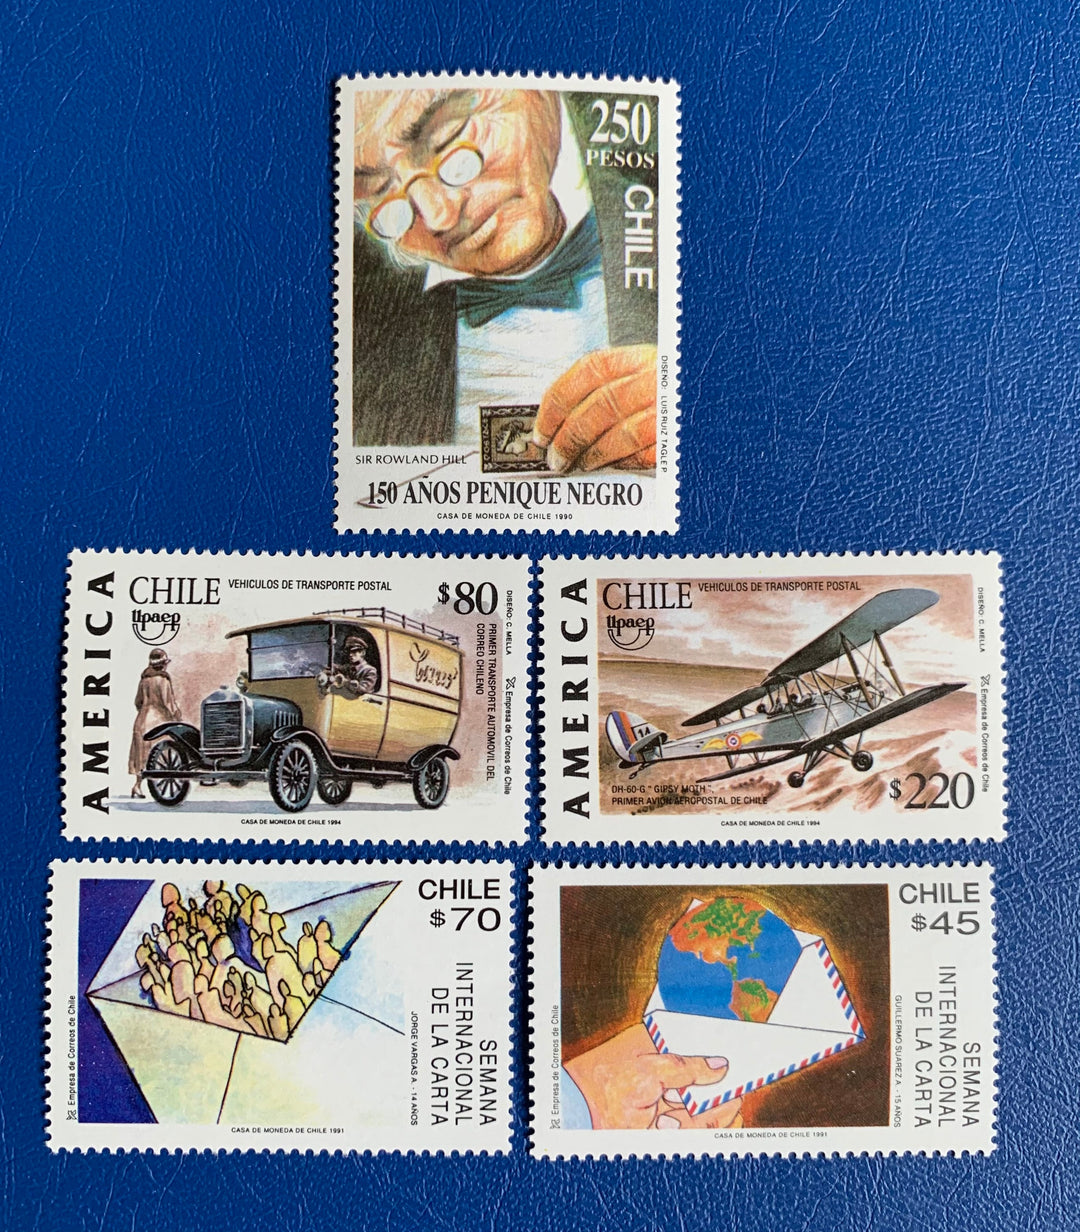 Chile - Original Vintage Postage Stamps- 1990-94 Postal History - for the collector, artist or crafter